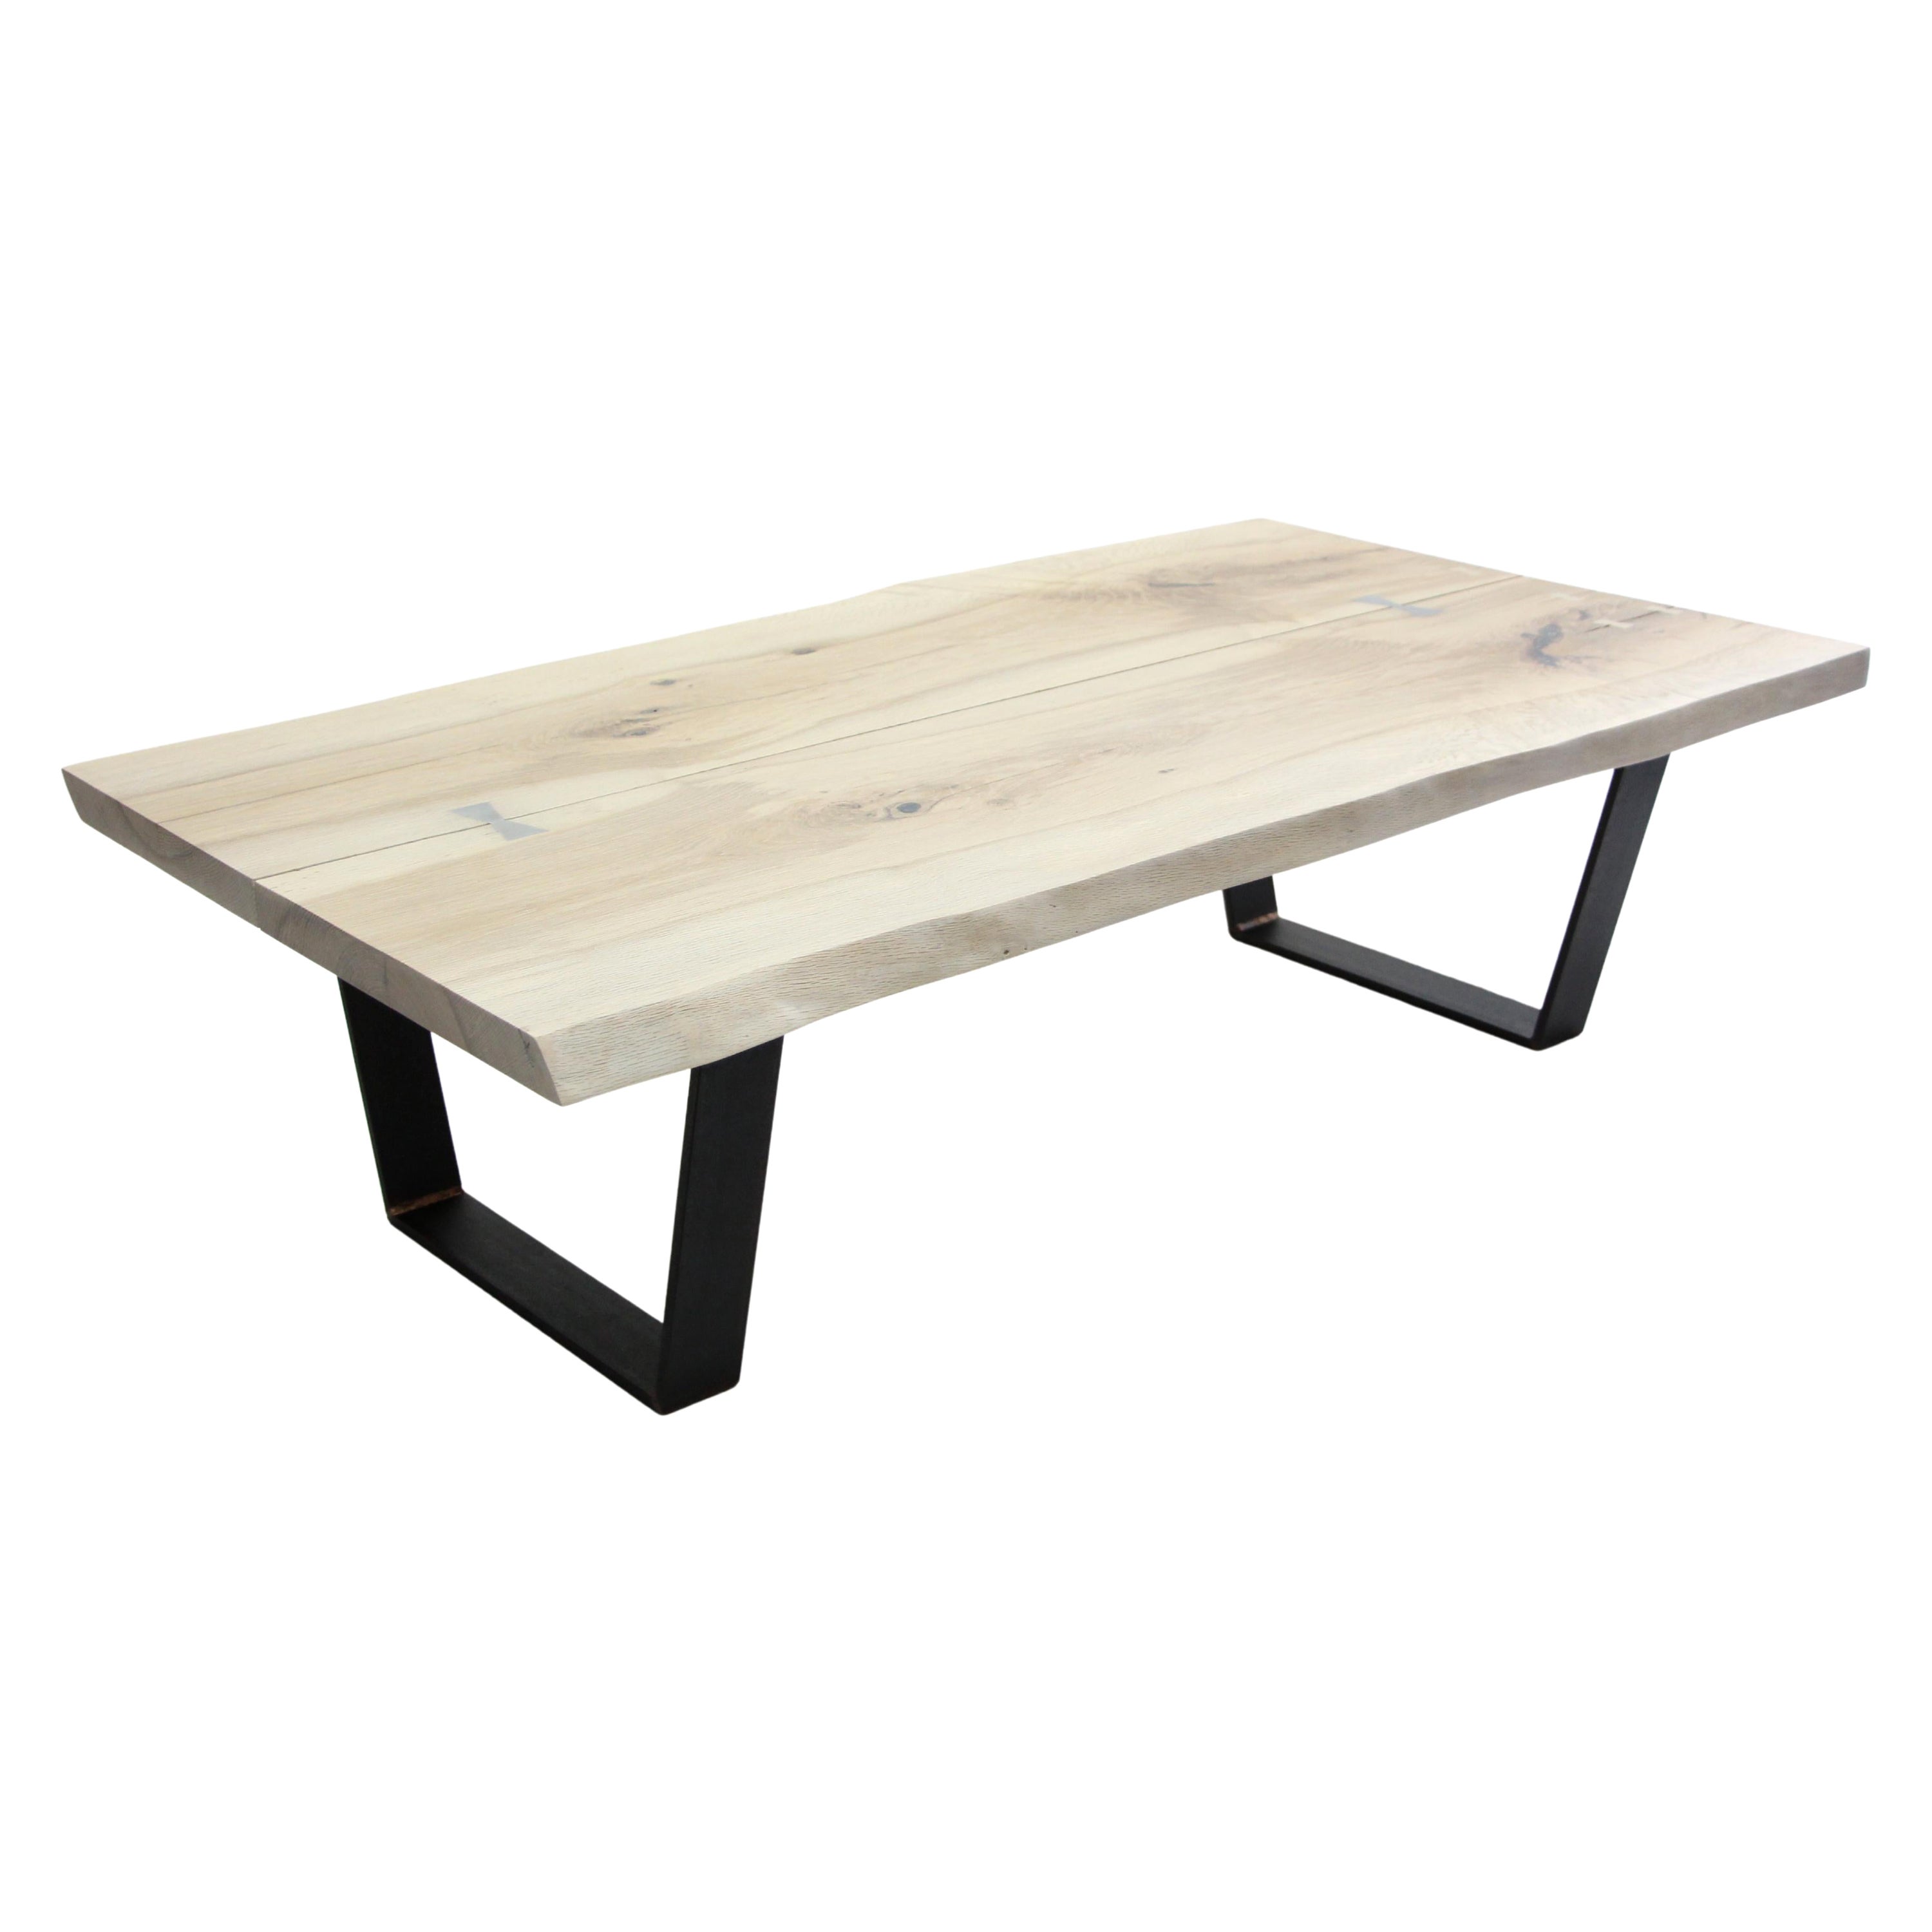 "Heritage" White Oak Solid Steel-Leg Coffee Table or Desk with Butterfly Inlays